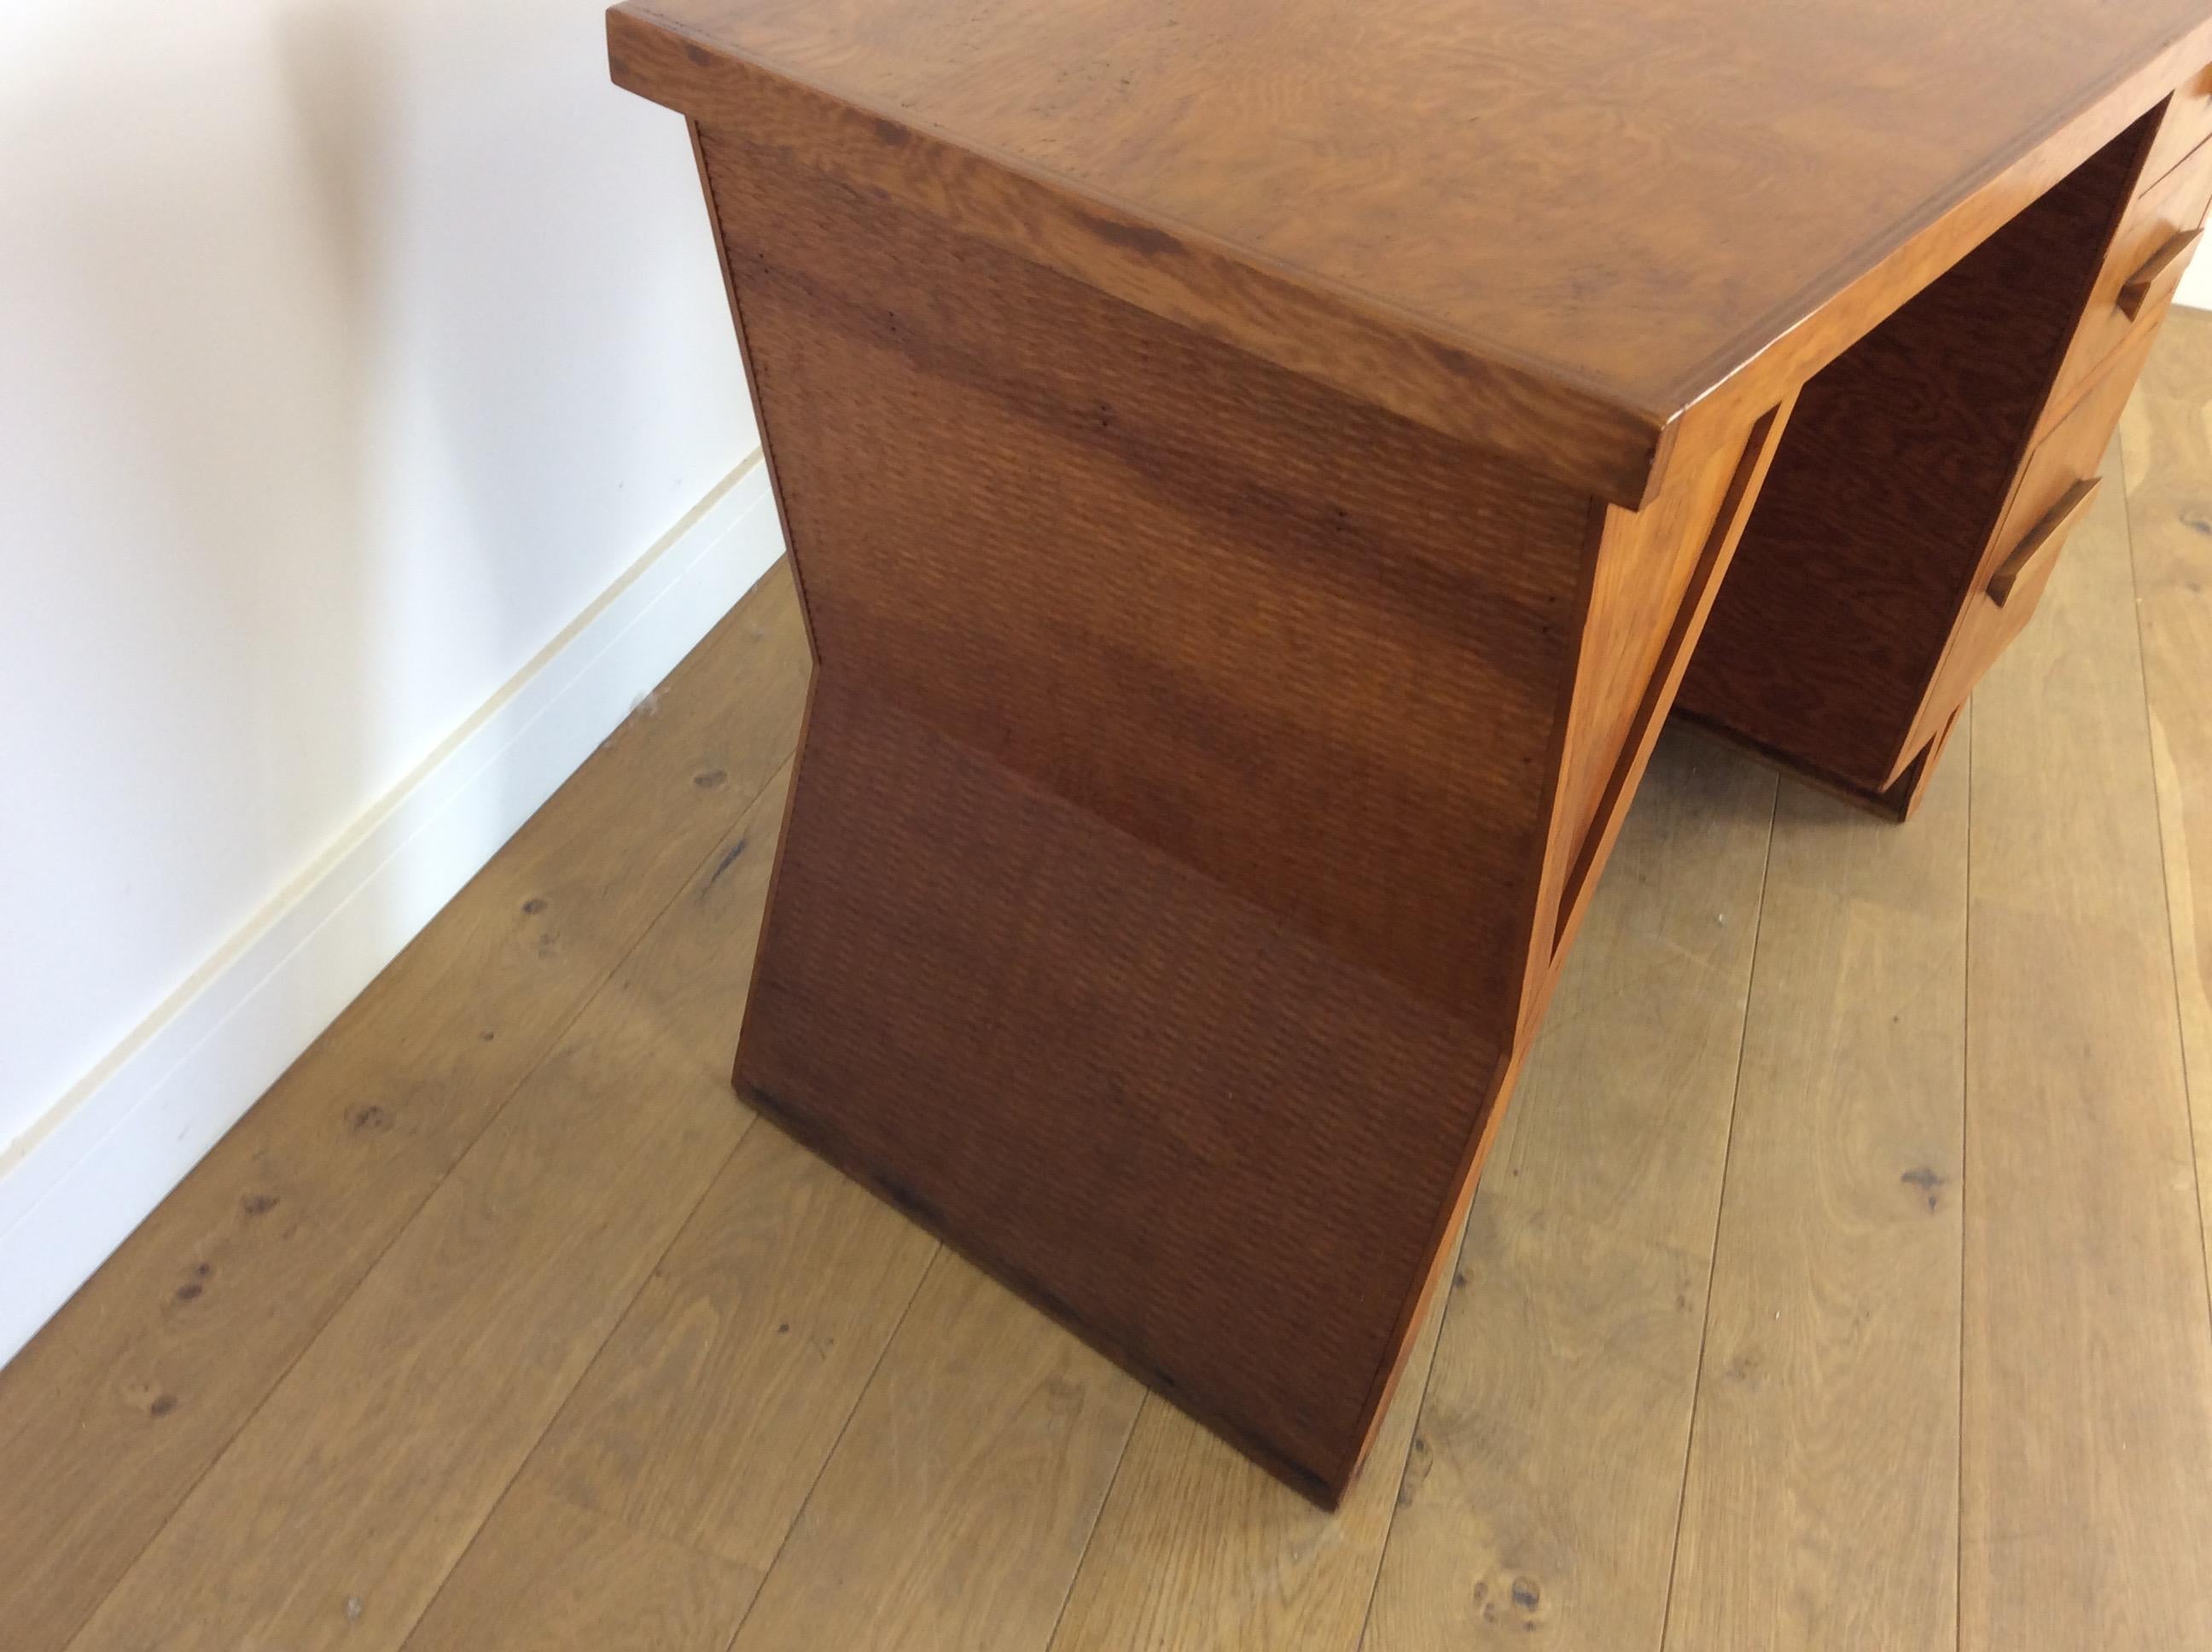 Plywood Rare Midcentury Ply Desk For Sale